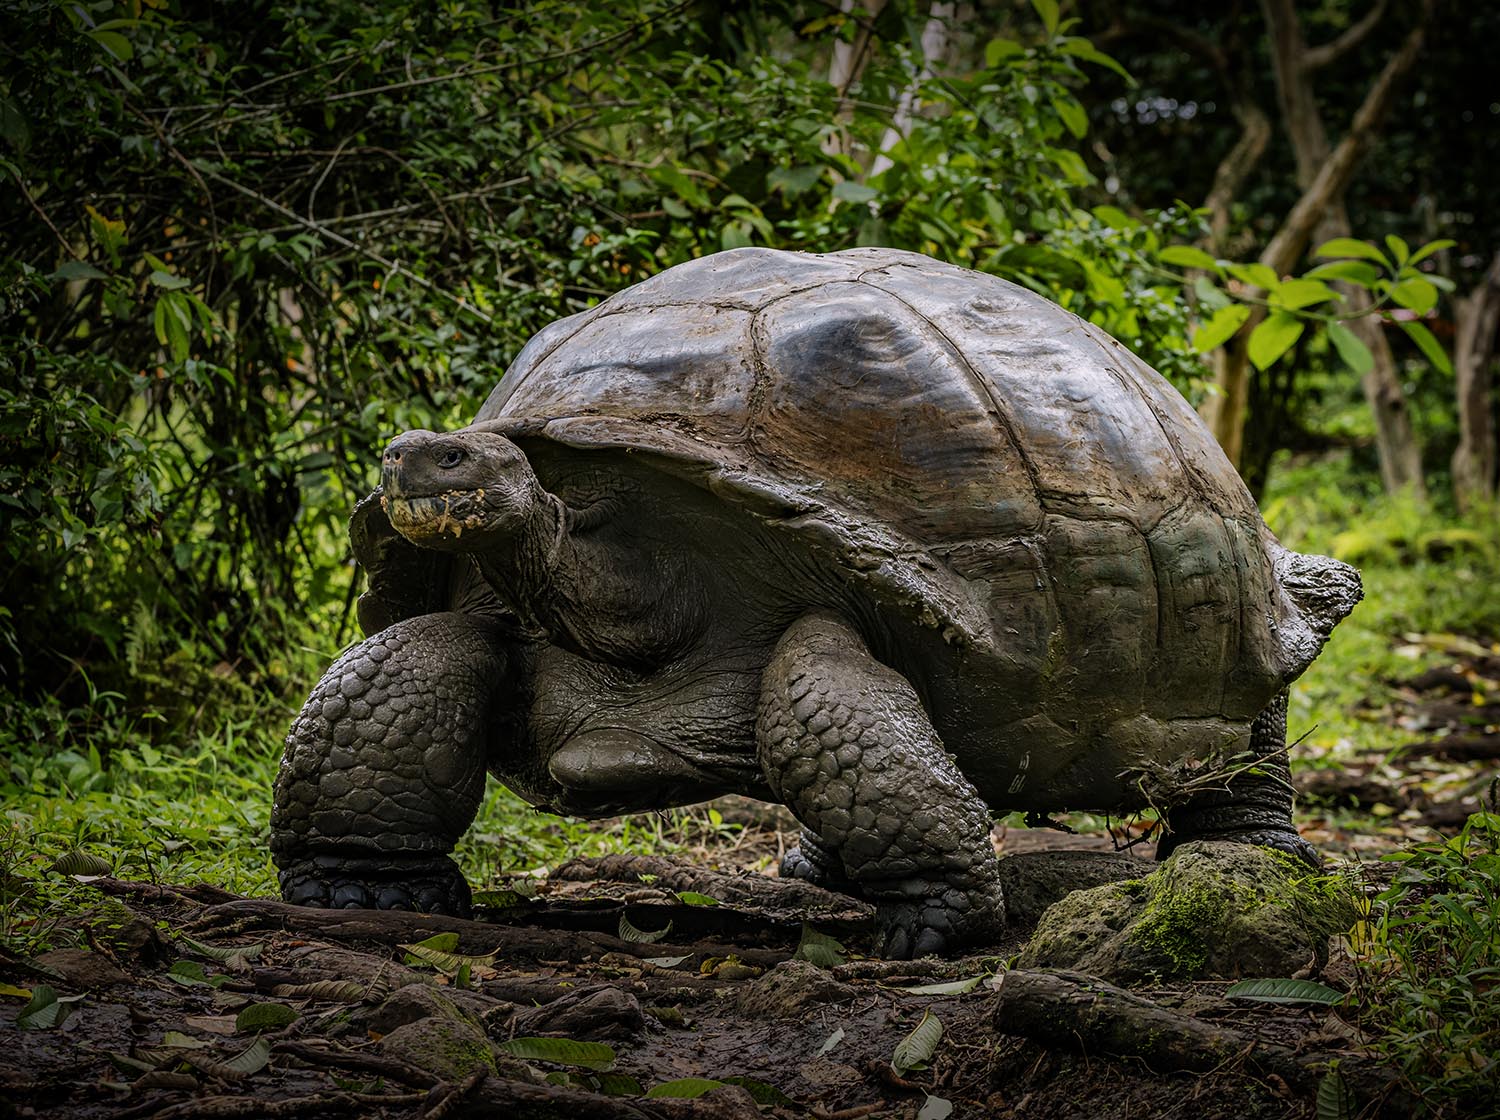 A large tortoise making its way downtown, walking slow, slow paces and its home bound. Dununununununu. Sorry, it's actually in a beautiful green hollow, the look on its face just evokes that song for me.